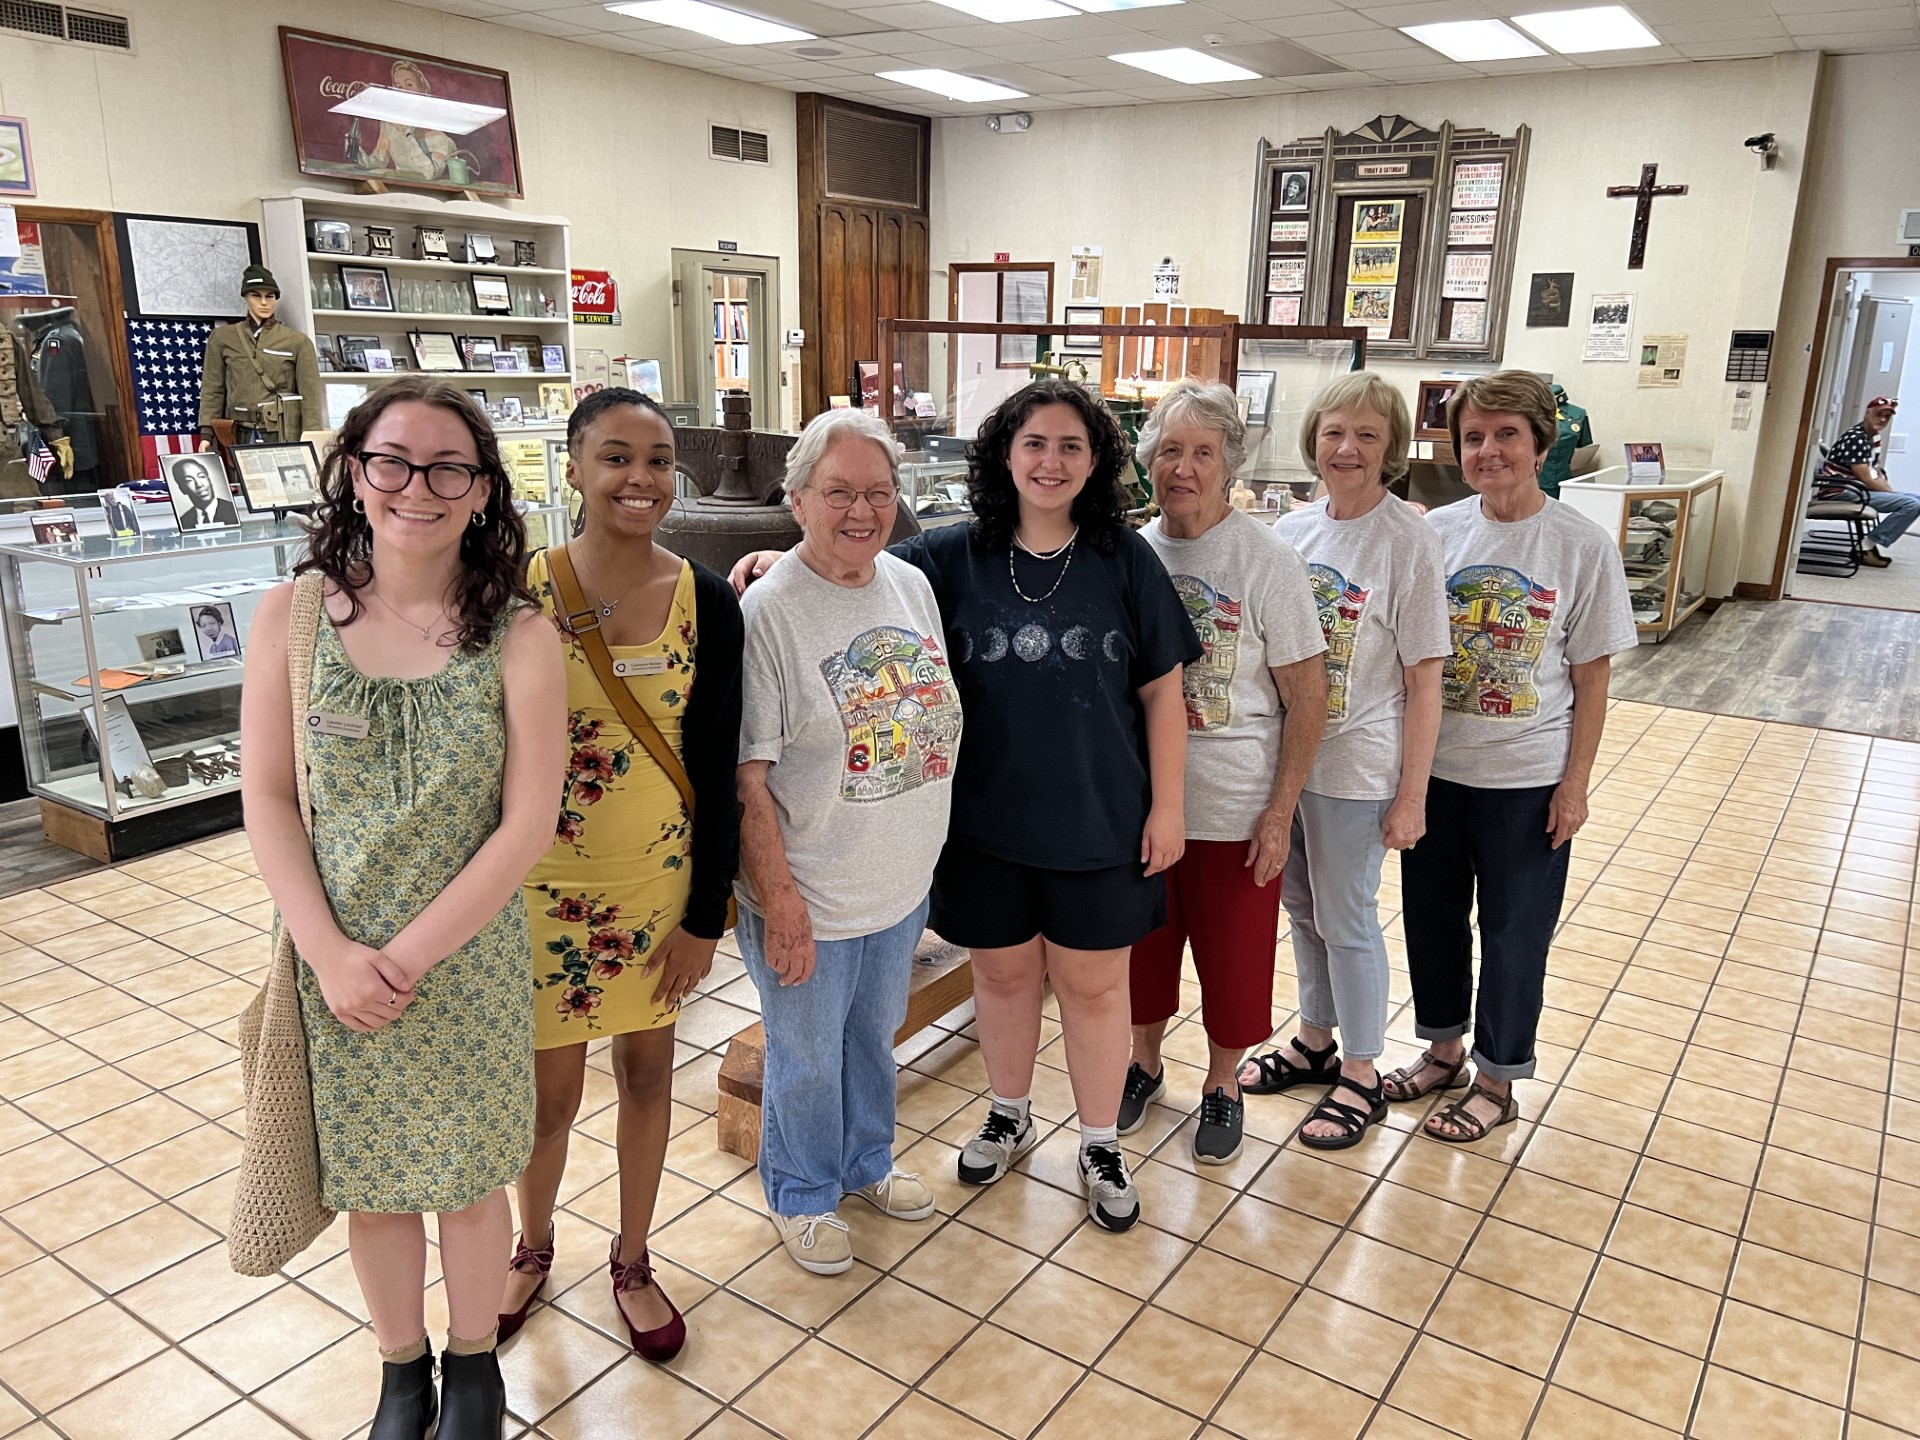 7 women stand in the lobby of the Collinsville museum